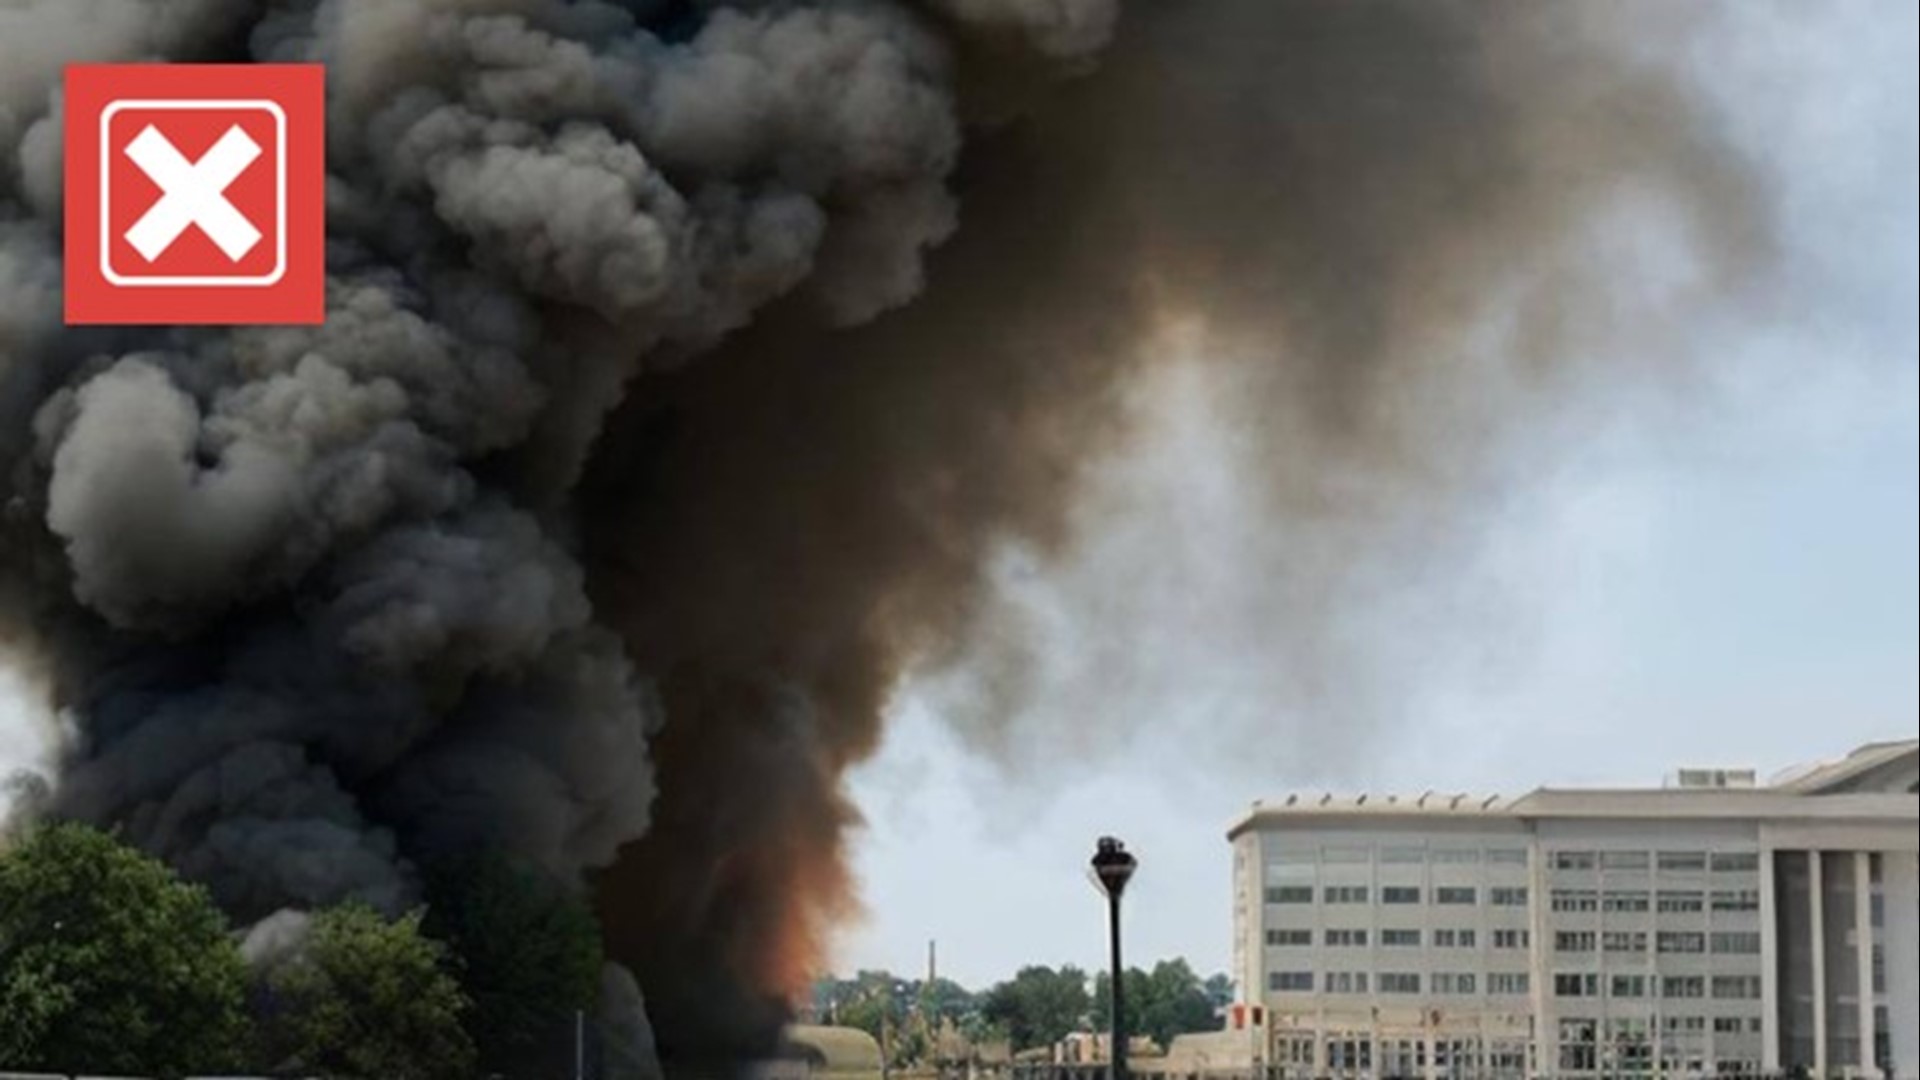 Officials say there was no explosion at the Pentagon Monday morning, following the spread of a viral image showing a large column of black smoke.